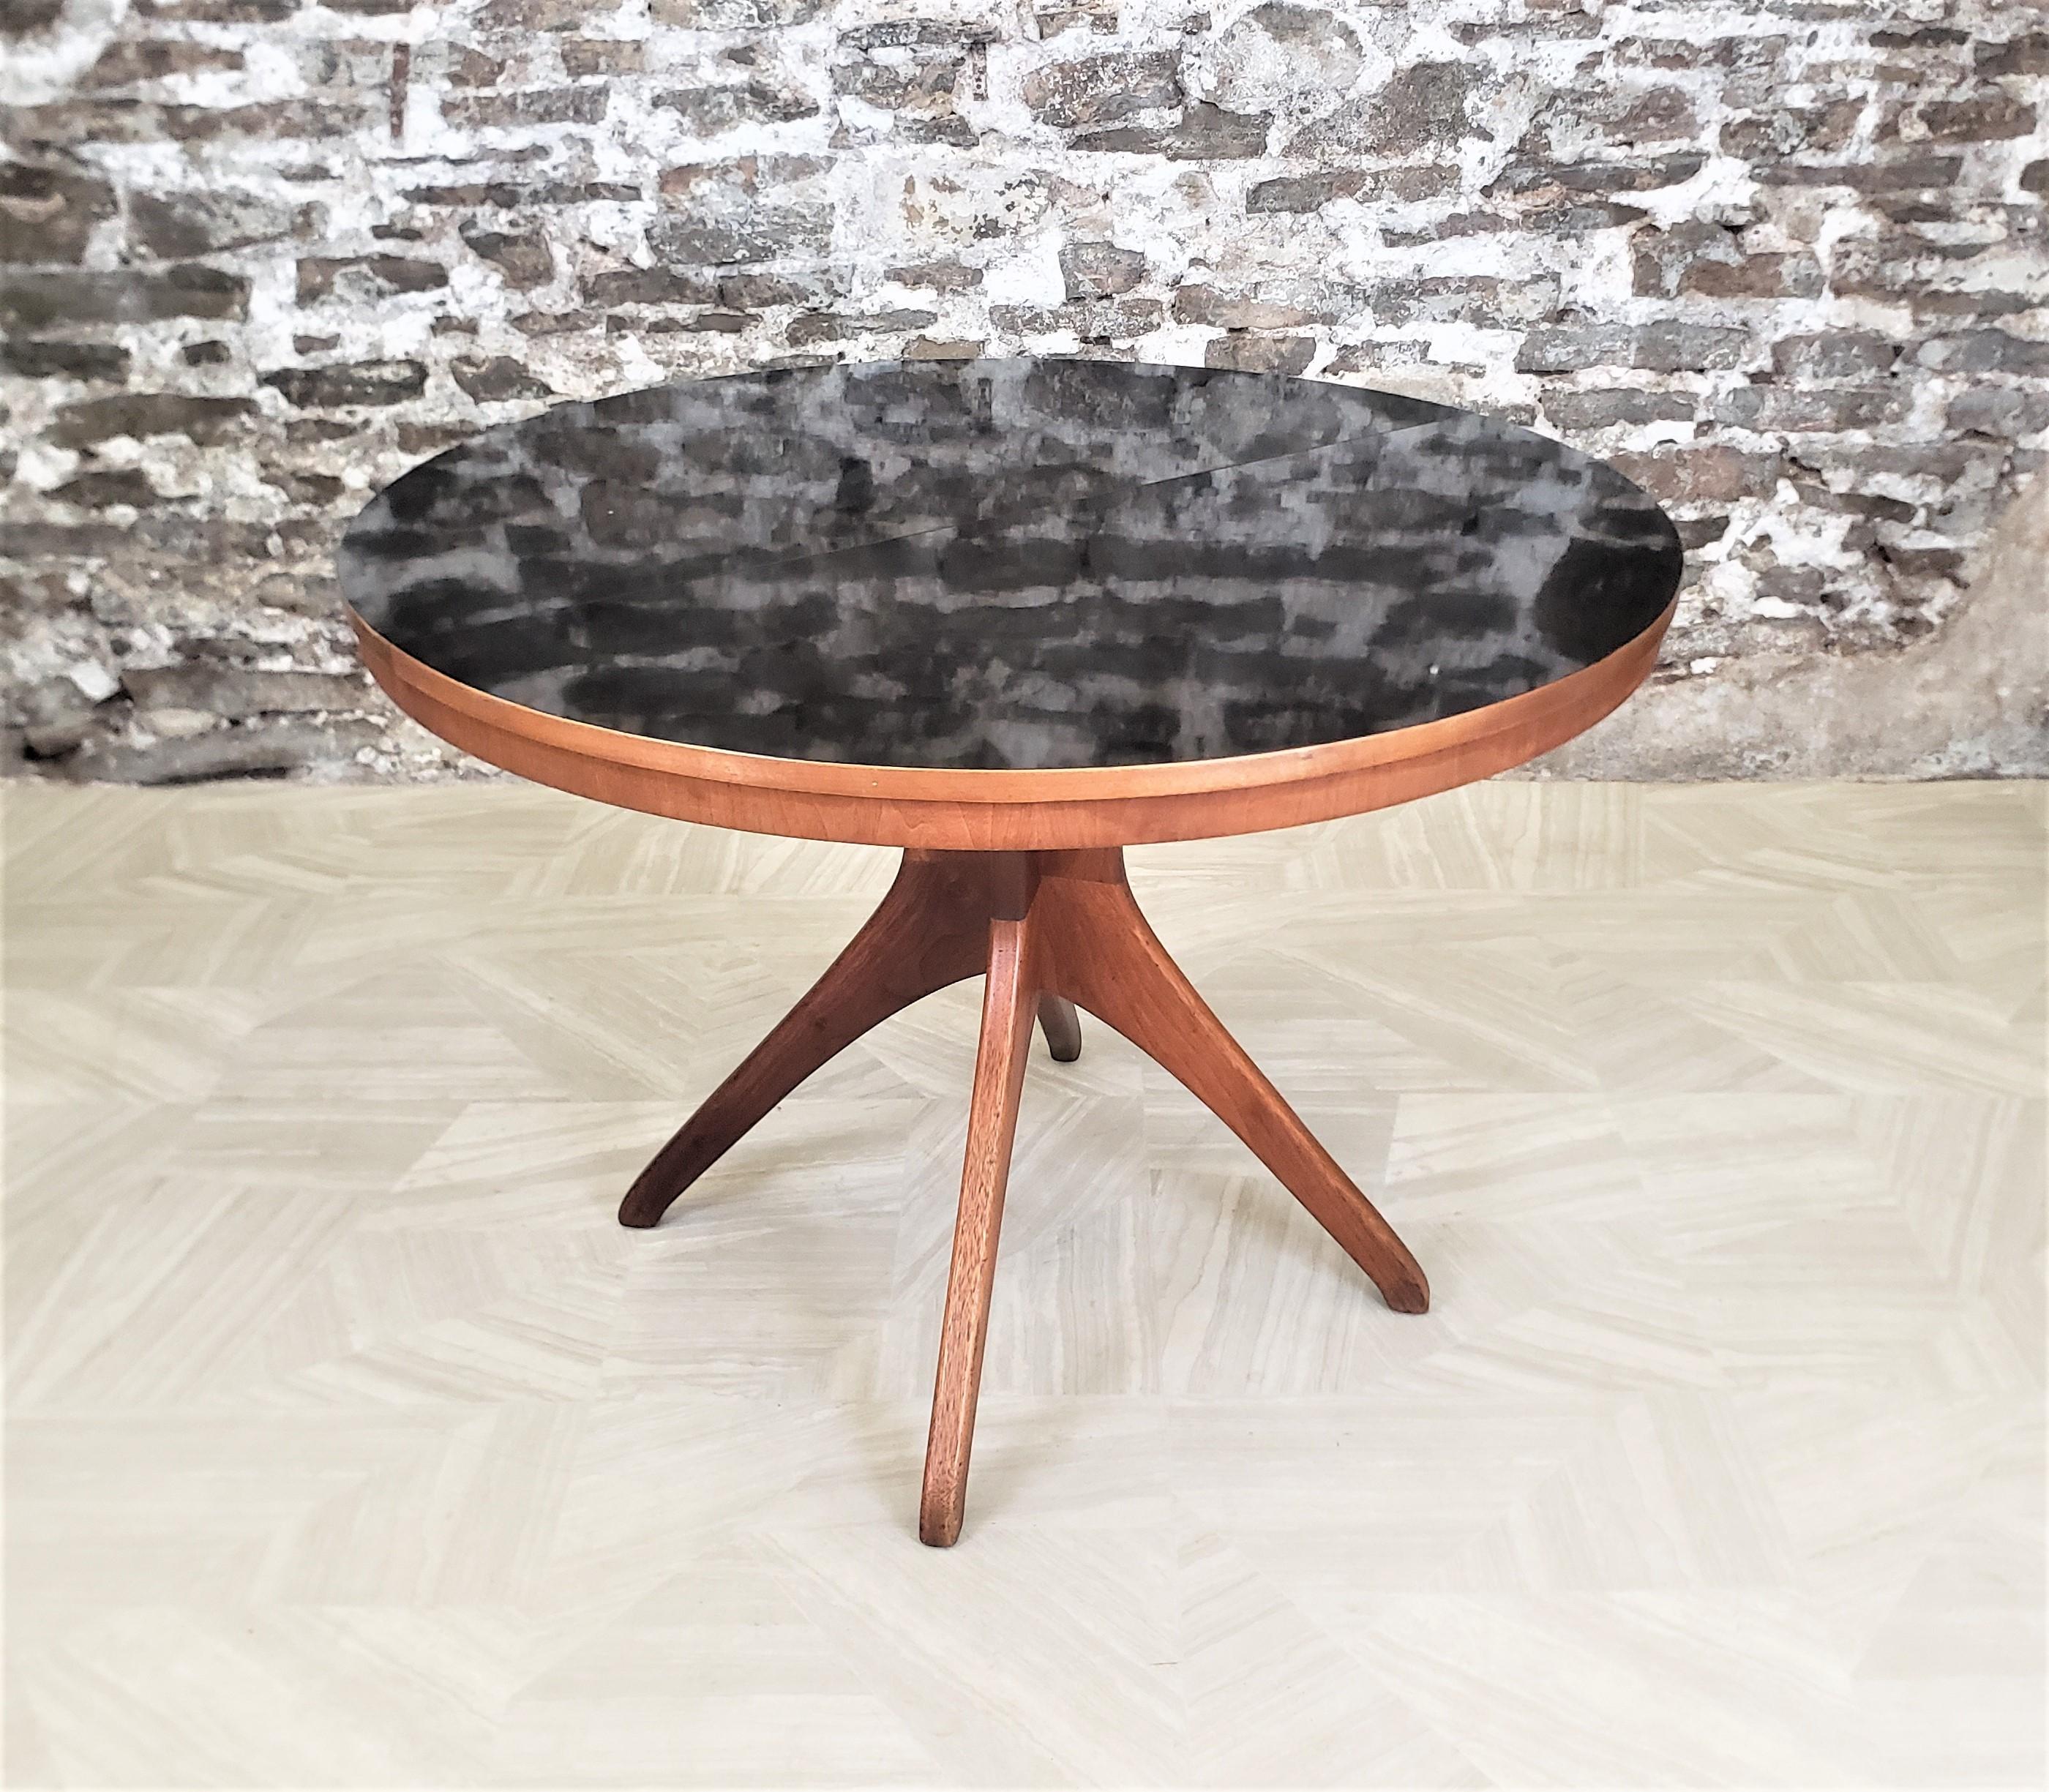 Hand-Crafted Teak & Arborite Mid-Century Round or Oval Finnish Dining Table with Sputnik Legs